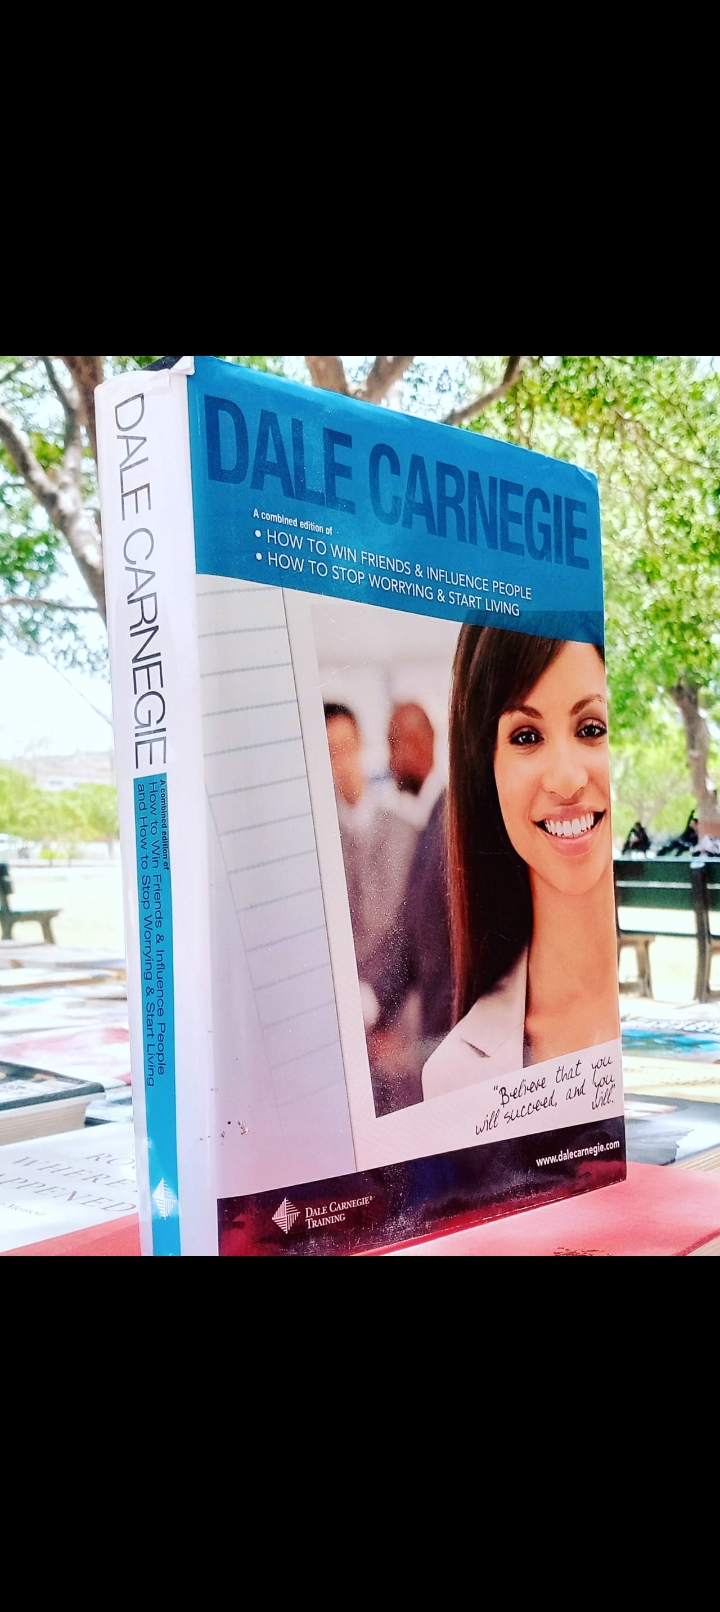 dale carnegie a combined edition of how to win friends & influence people and how to stop worrying &